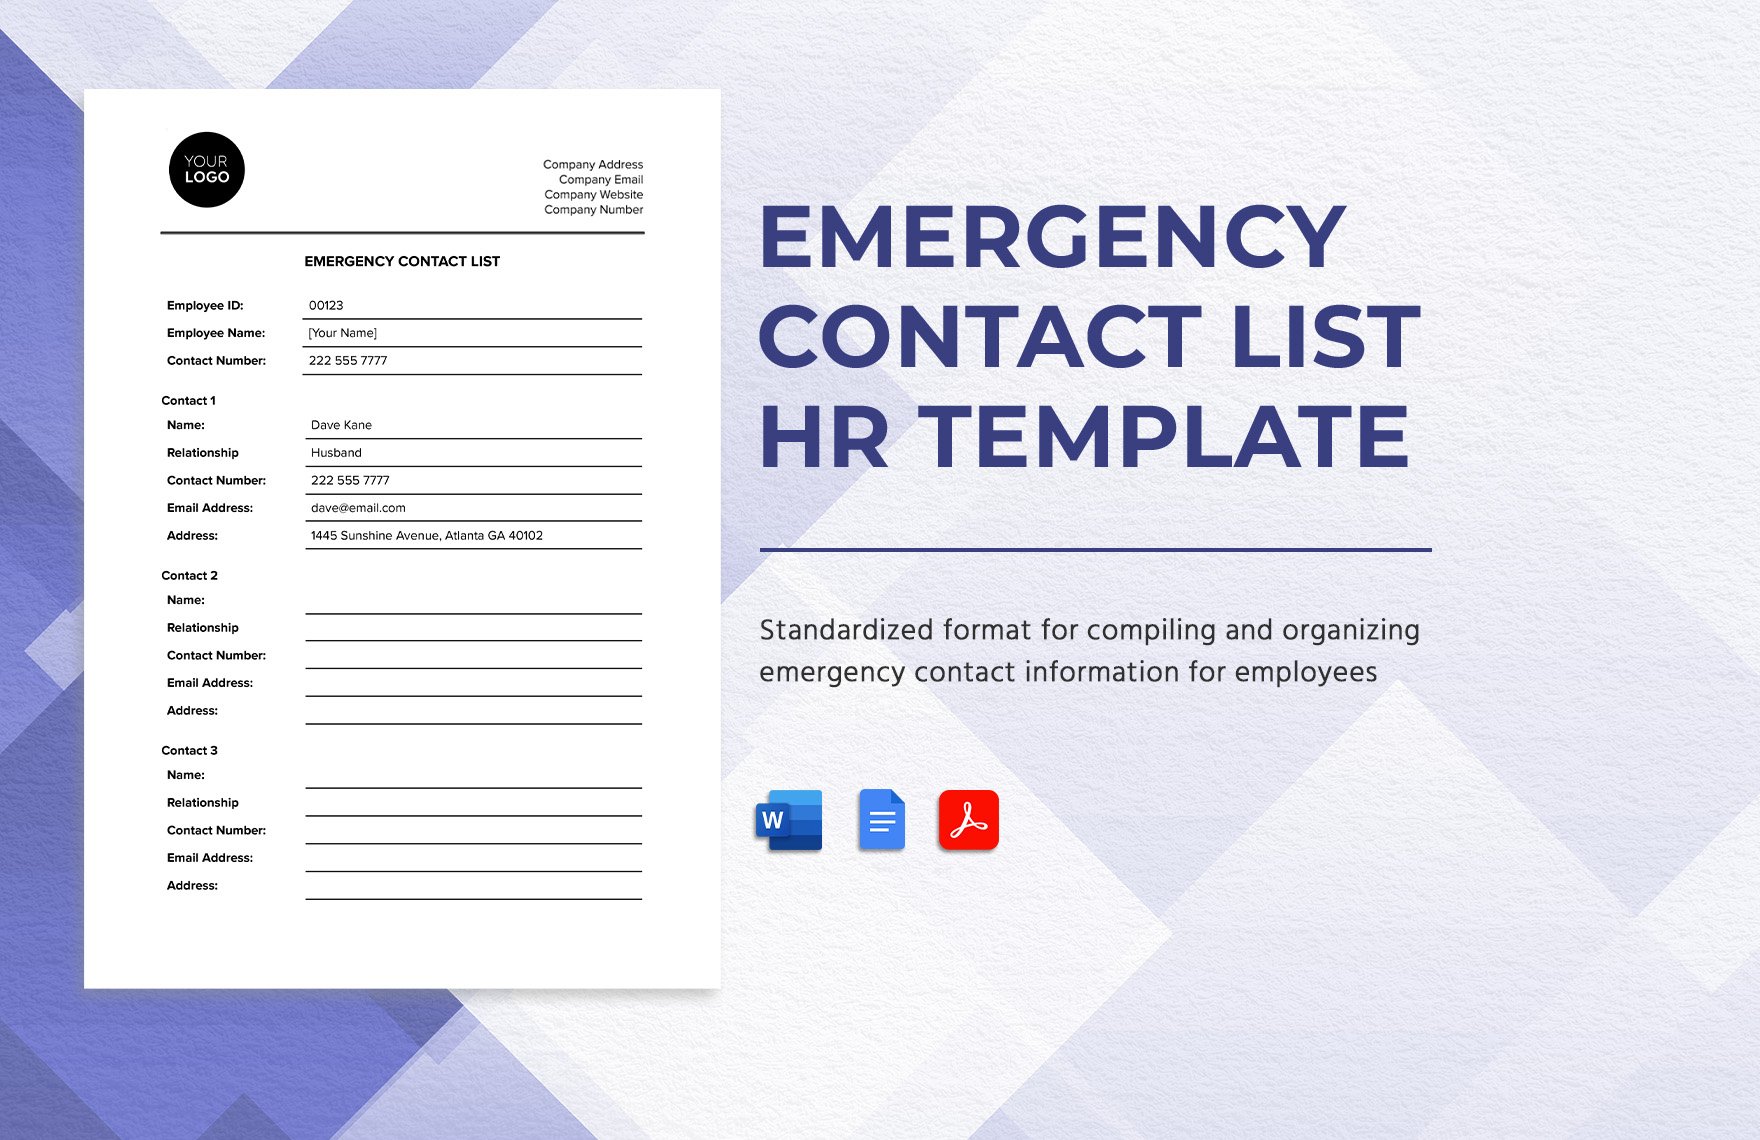 Emergency Contact List HR Template in Word, Google Docs, PDF